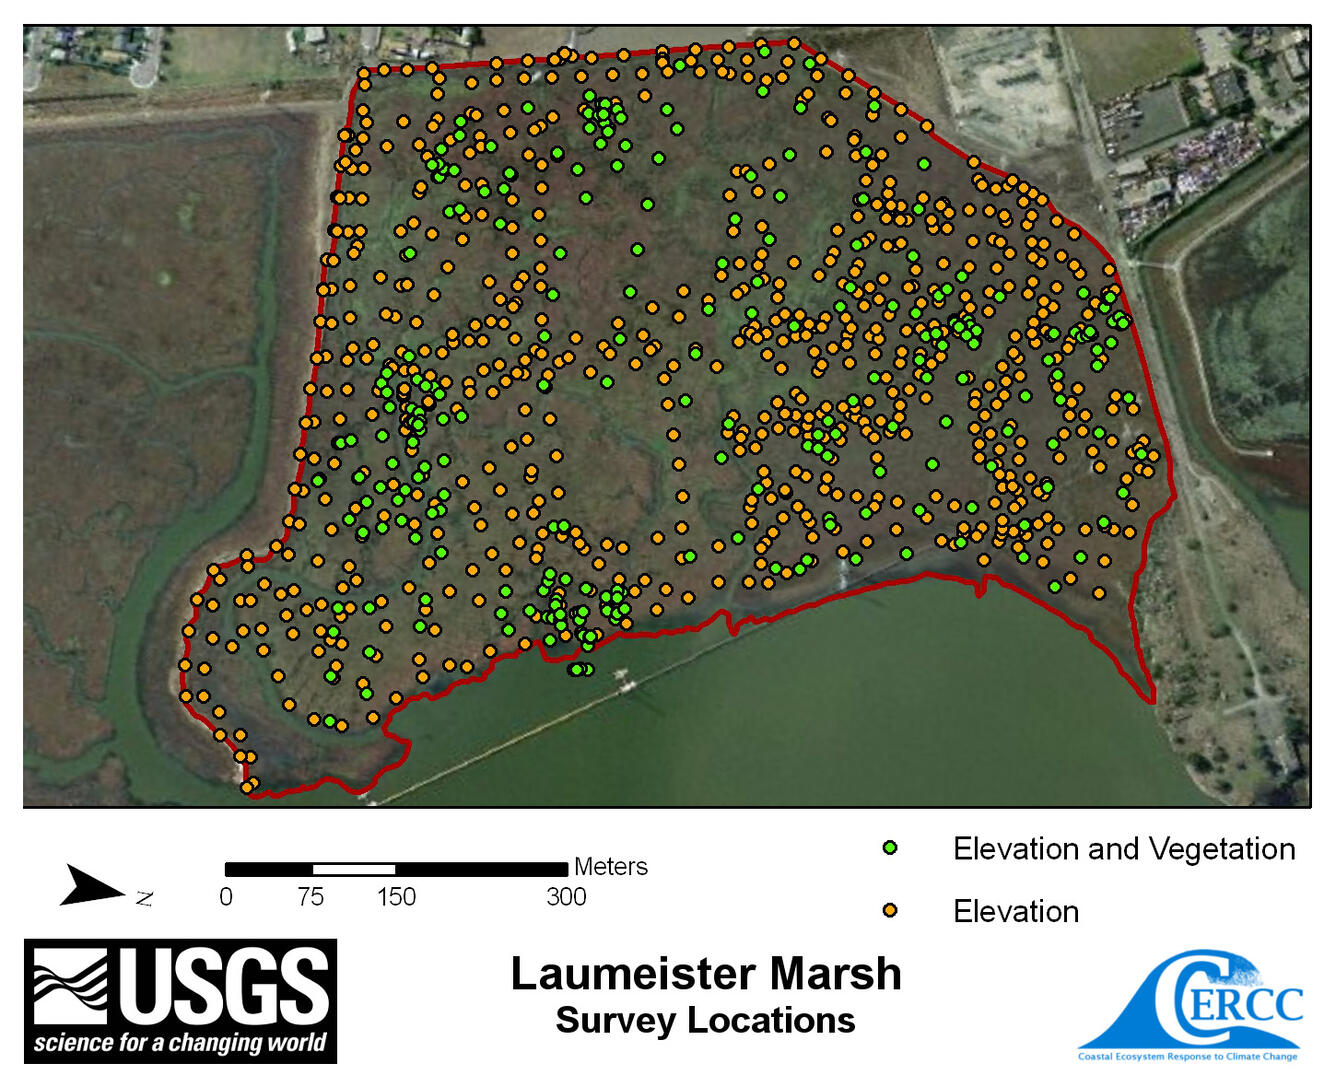 Map of elevation sampling point locations at Laumeister Marsh